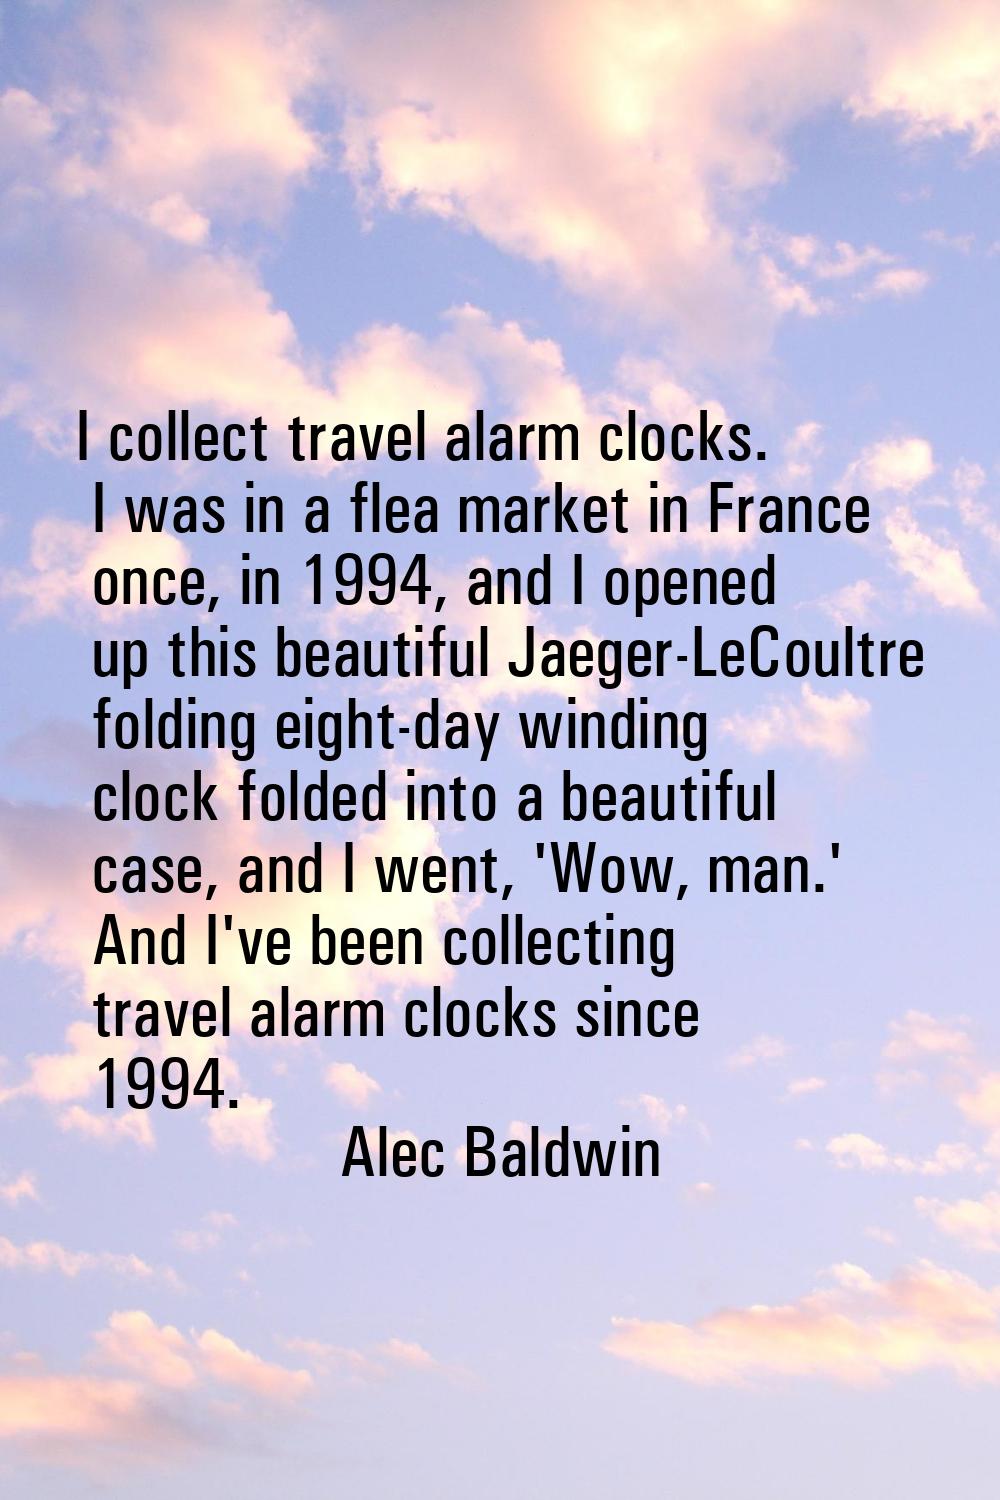 I collect travel alarm clocks. I was in a flea market in France once, in 1994, and I opened up this